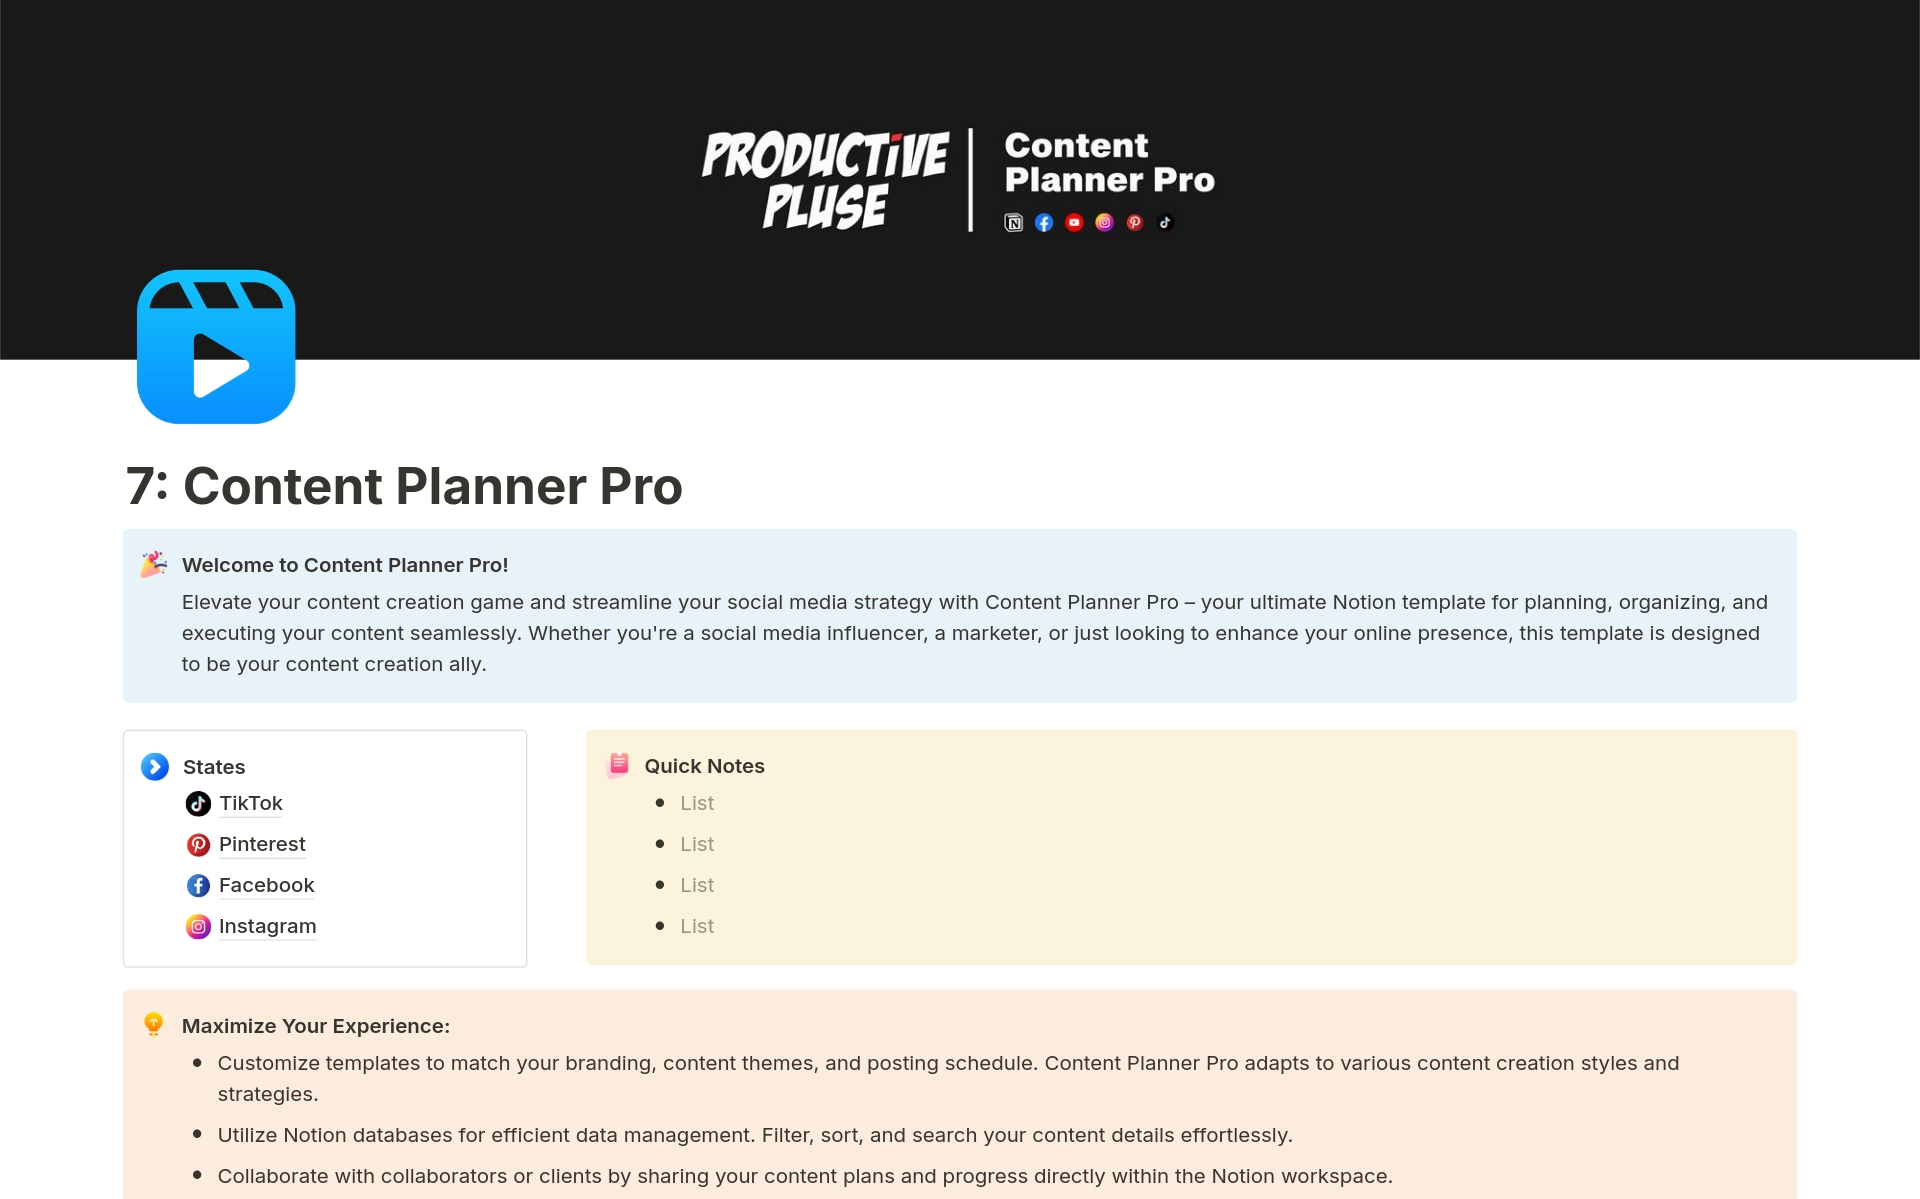 Elevate your content creation game and streamline your social media strategy with Content Planner Pro – your ultimate Notion template for planning, organizing, and executing your content seamlessly.